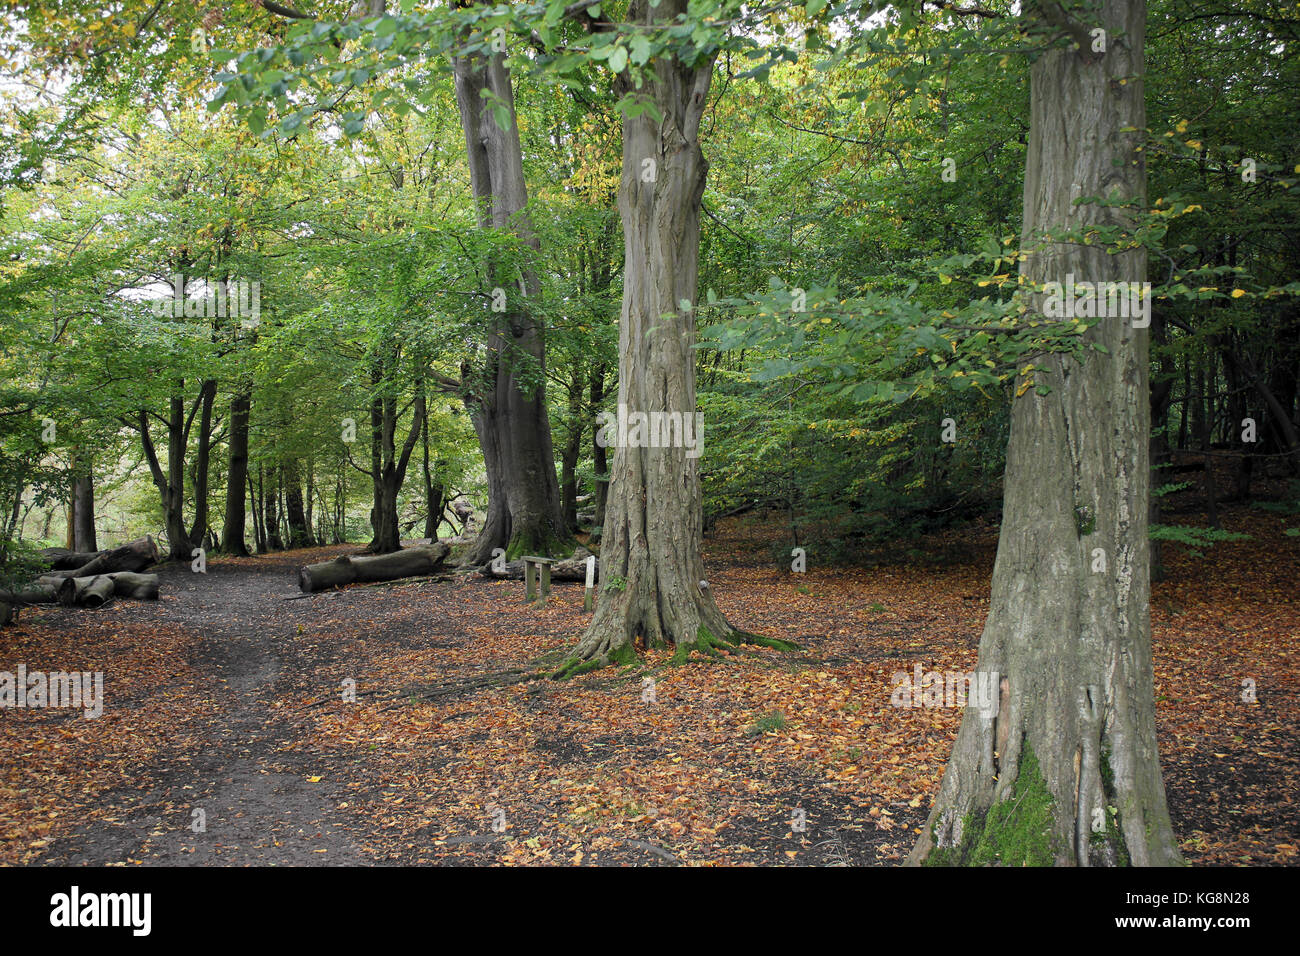 Trail Through Broad-leaved Woodland At Dibbinsdale Nature Reserve, Wirral, UK Stock Photo